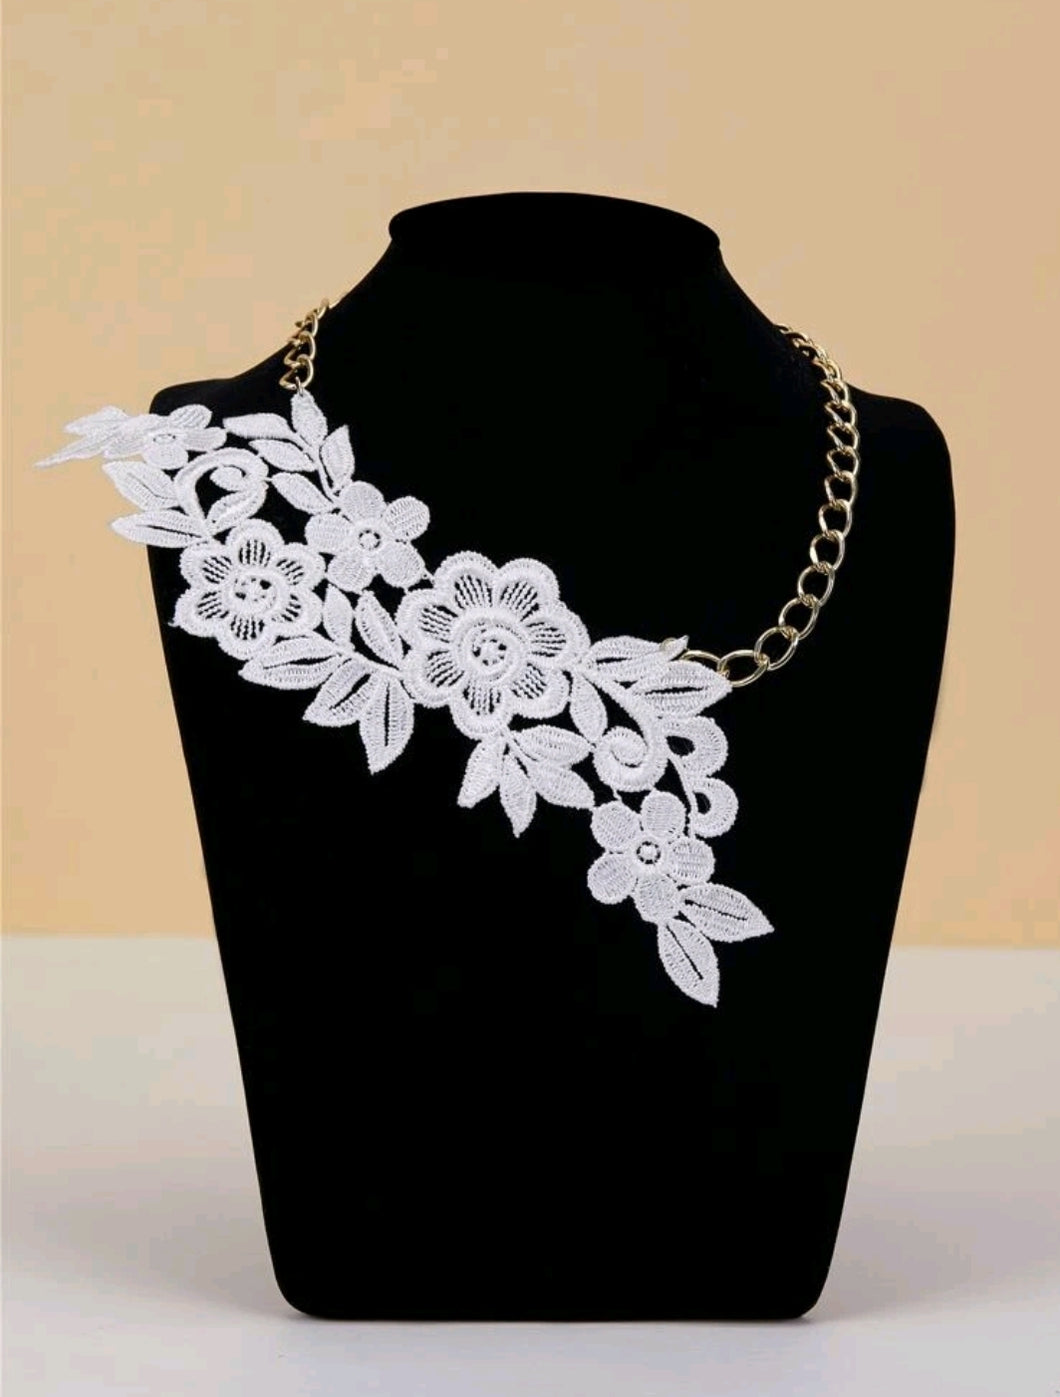  Leave everyone amazed with this stunning white embroidered floral design chain necklace. Add a touch of elegance to your outfit! Lovely accessory - gift idea!      Details: Flowers     Type: Chain Necklaces     Material: Alloy     Color: White     Style: Glam, Elegant, Boho     Metal Color: Gold     Size: Length 45cm (17.7 inch)